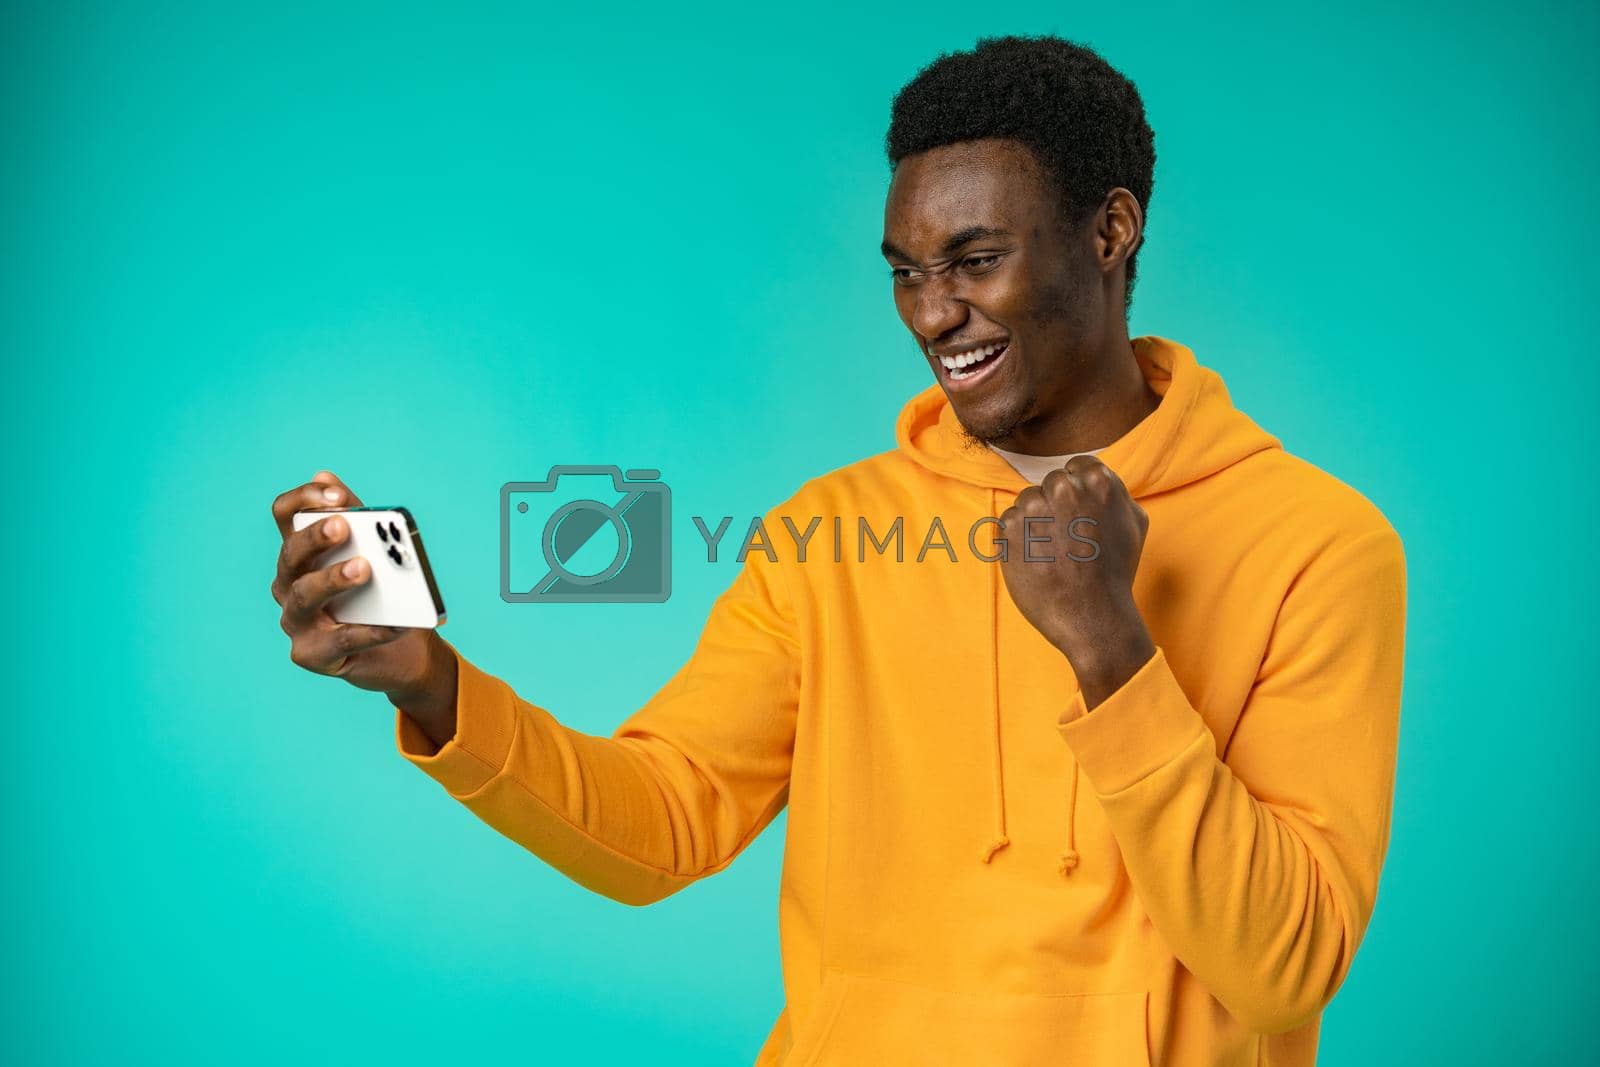 Royalty free image of Excited black man reading good news on cellphone in studio by Fabrikasimf